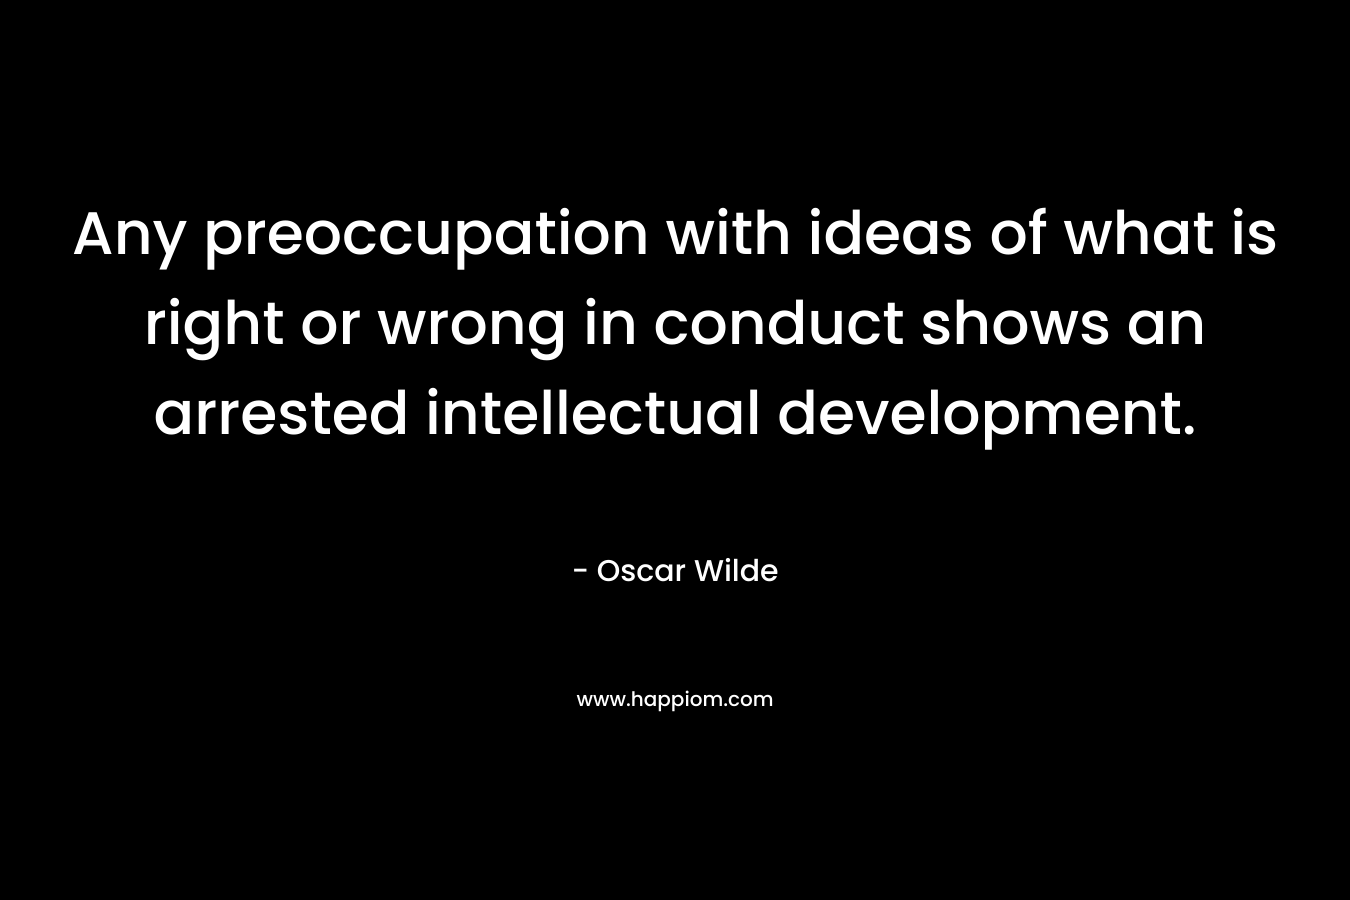 Any preoccupation with ideas of what is right or wrong in conduct shows an arrested intellectual development. – Oscar Wilde